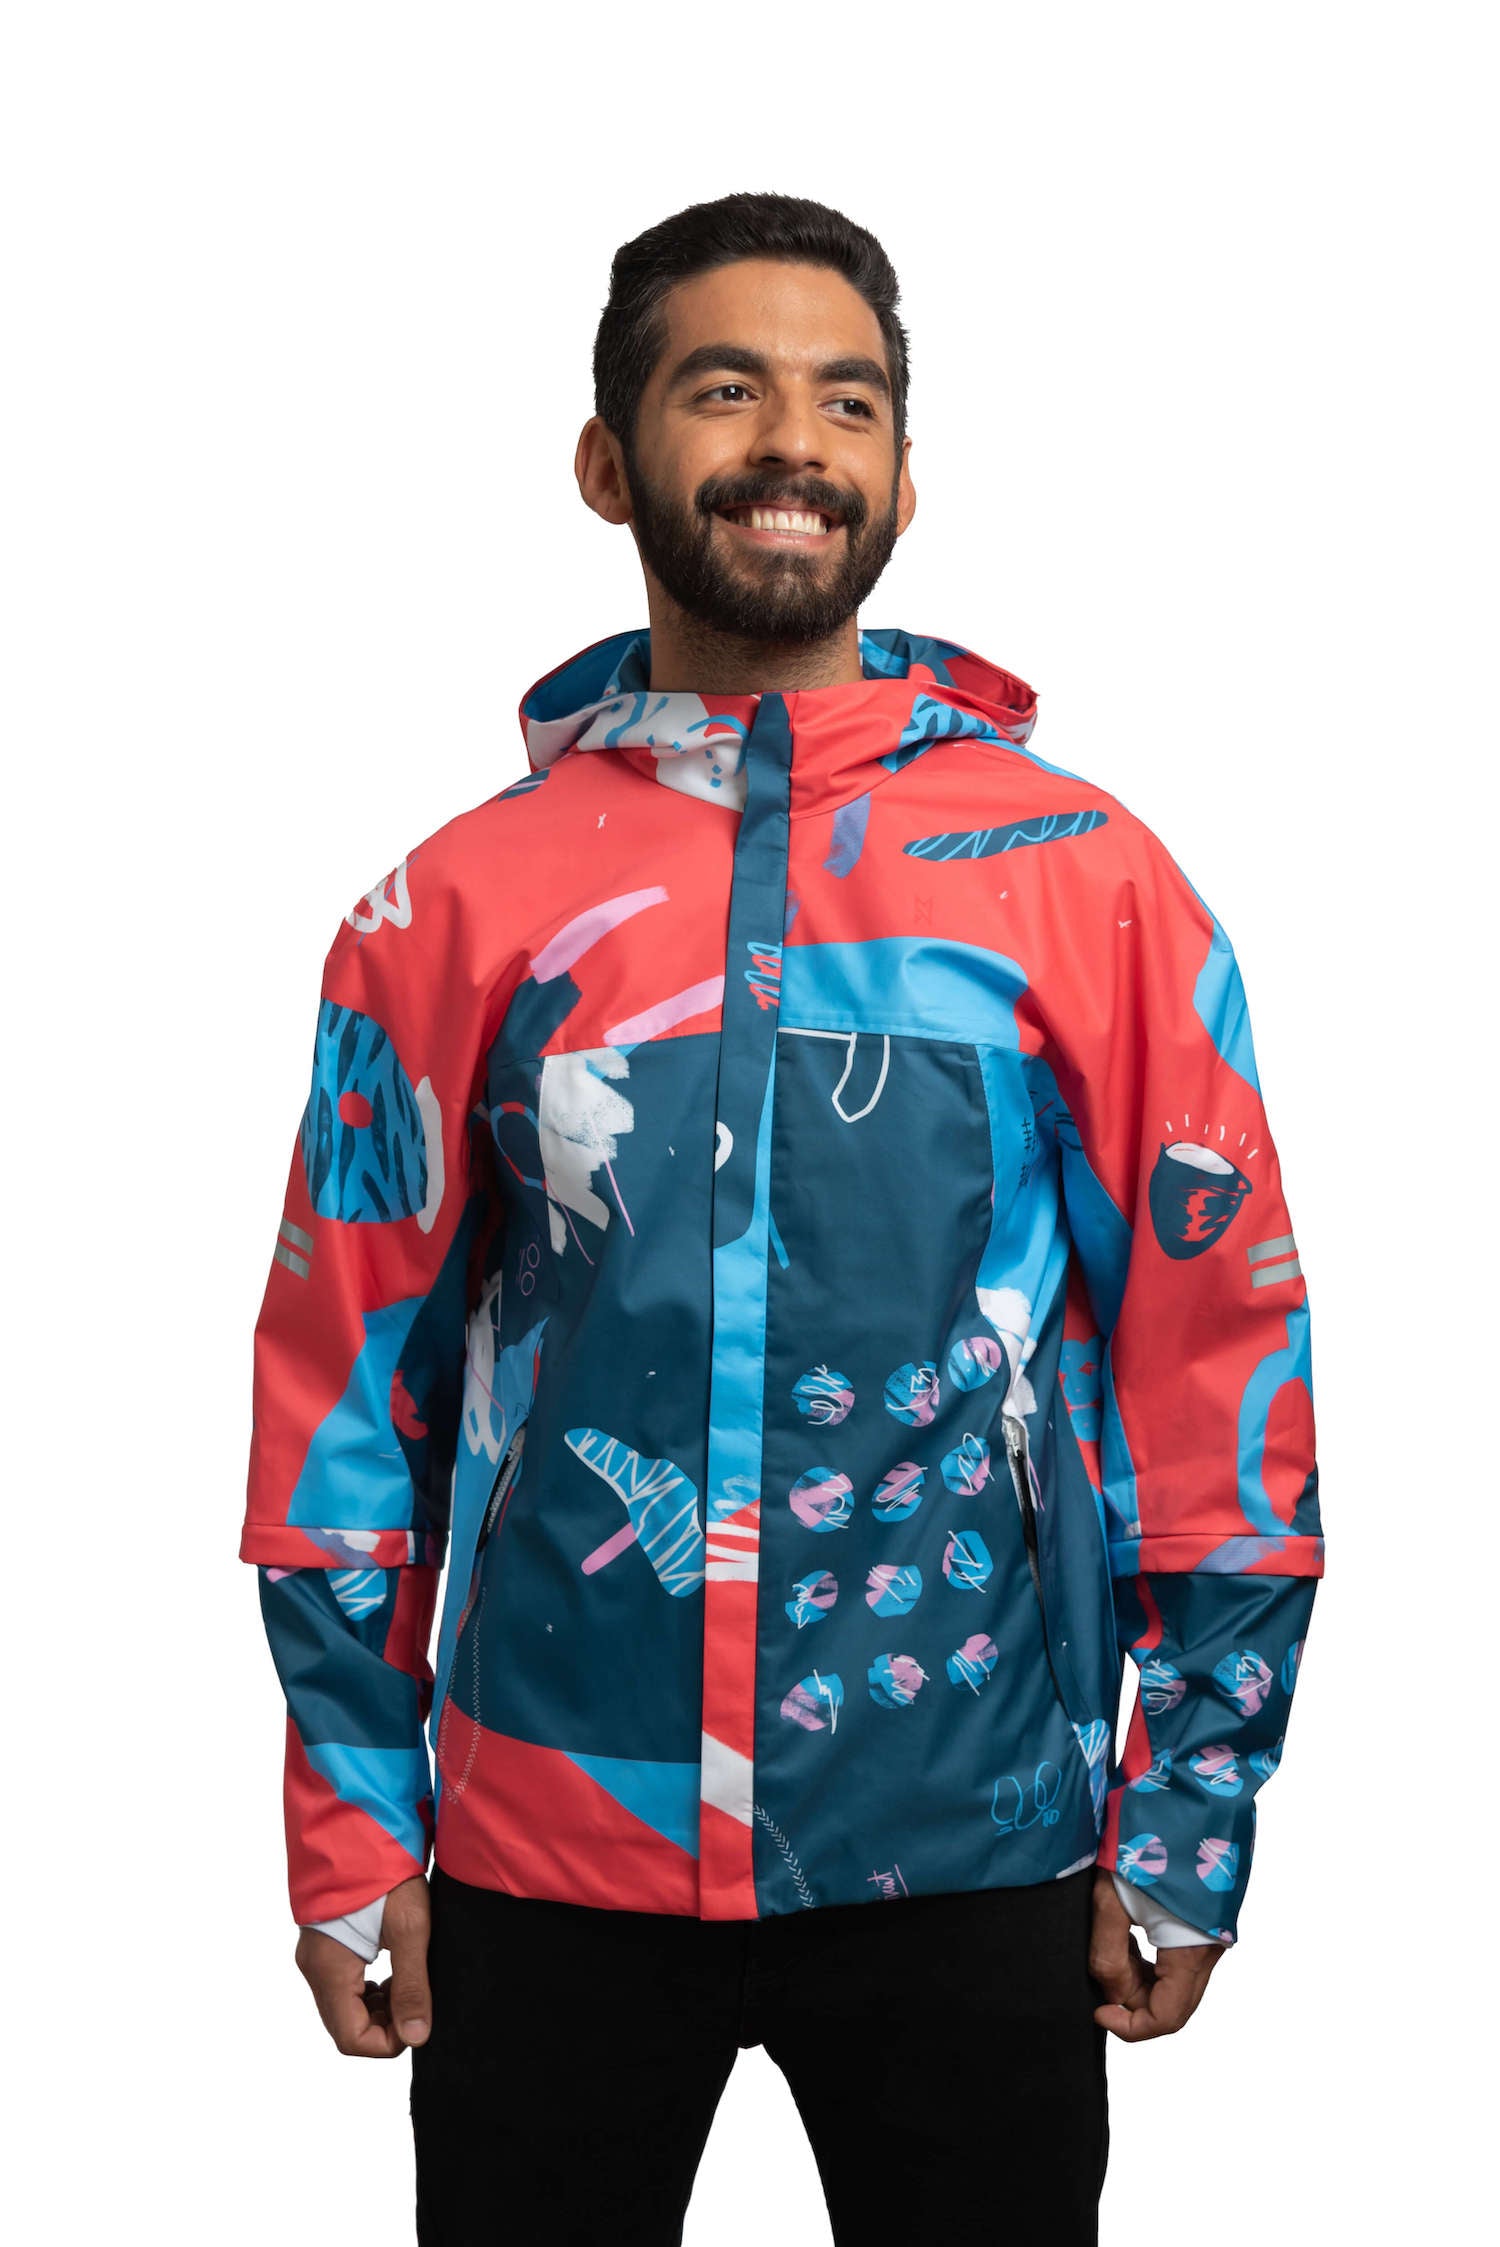 VELLO Bike Jacket MONTREET THE CYCLIST - Unisex Bicycle Clothing - Rain Jacket Men Women - Red and Blue